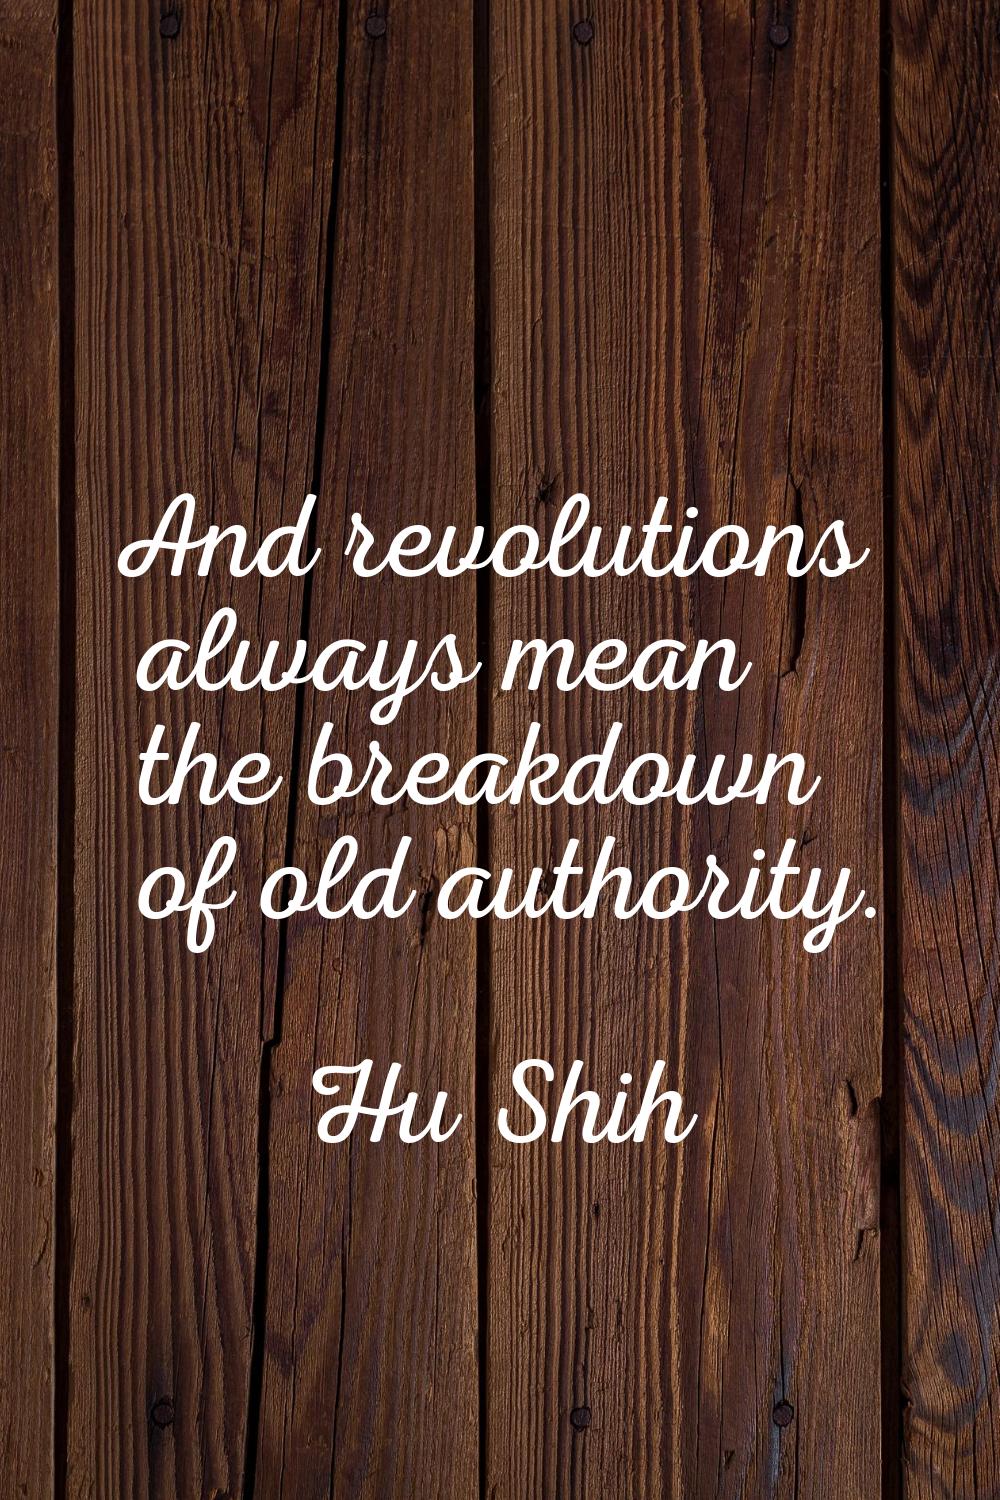 And revolutions always mean the breakdown of old authority.